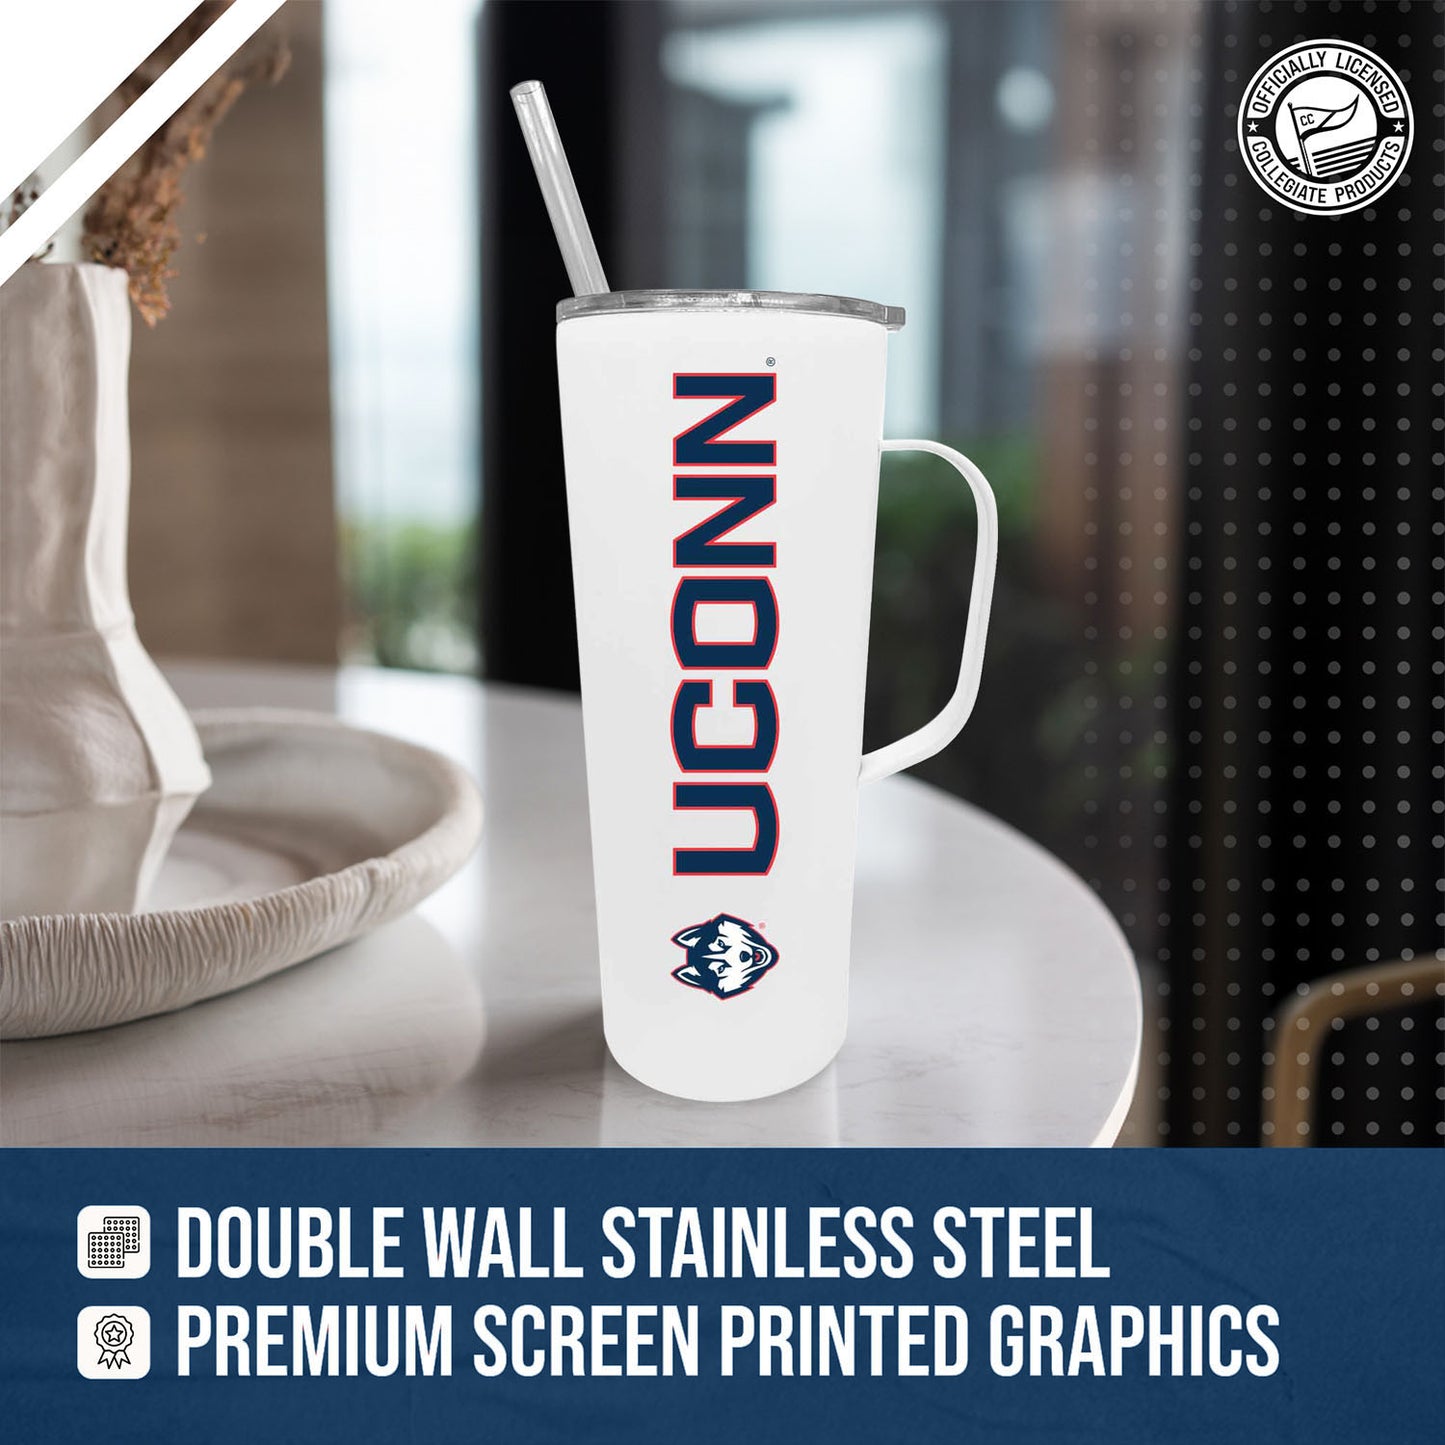 UCONN Huskies NCAA Stainless Steel 20oz Roadie With Handle & Dual Option Lid With Straw - White